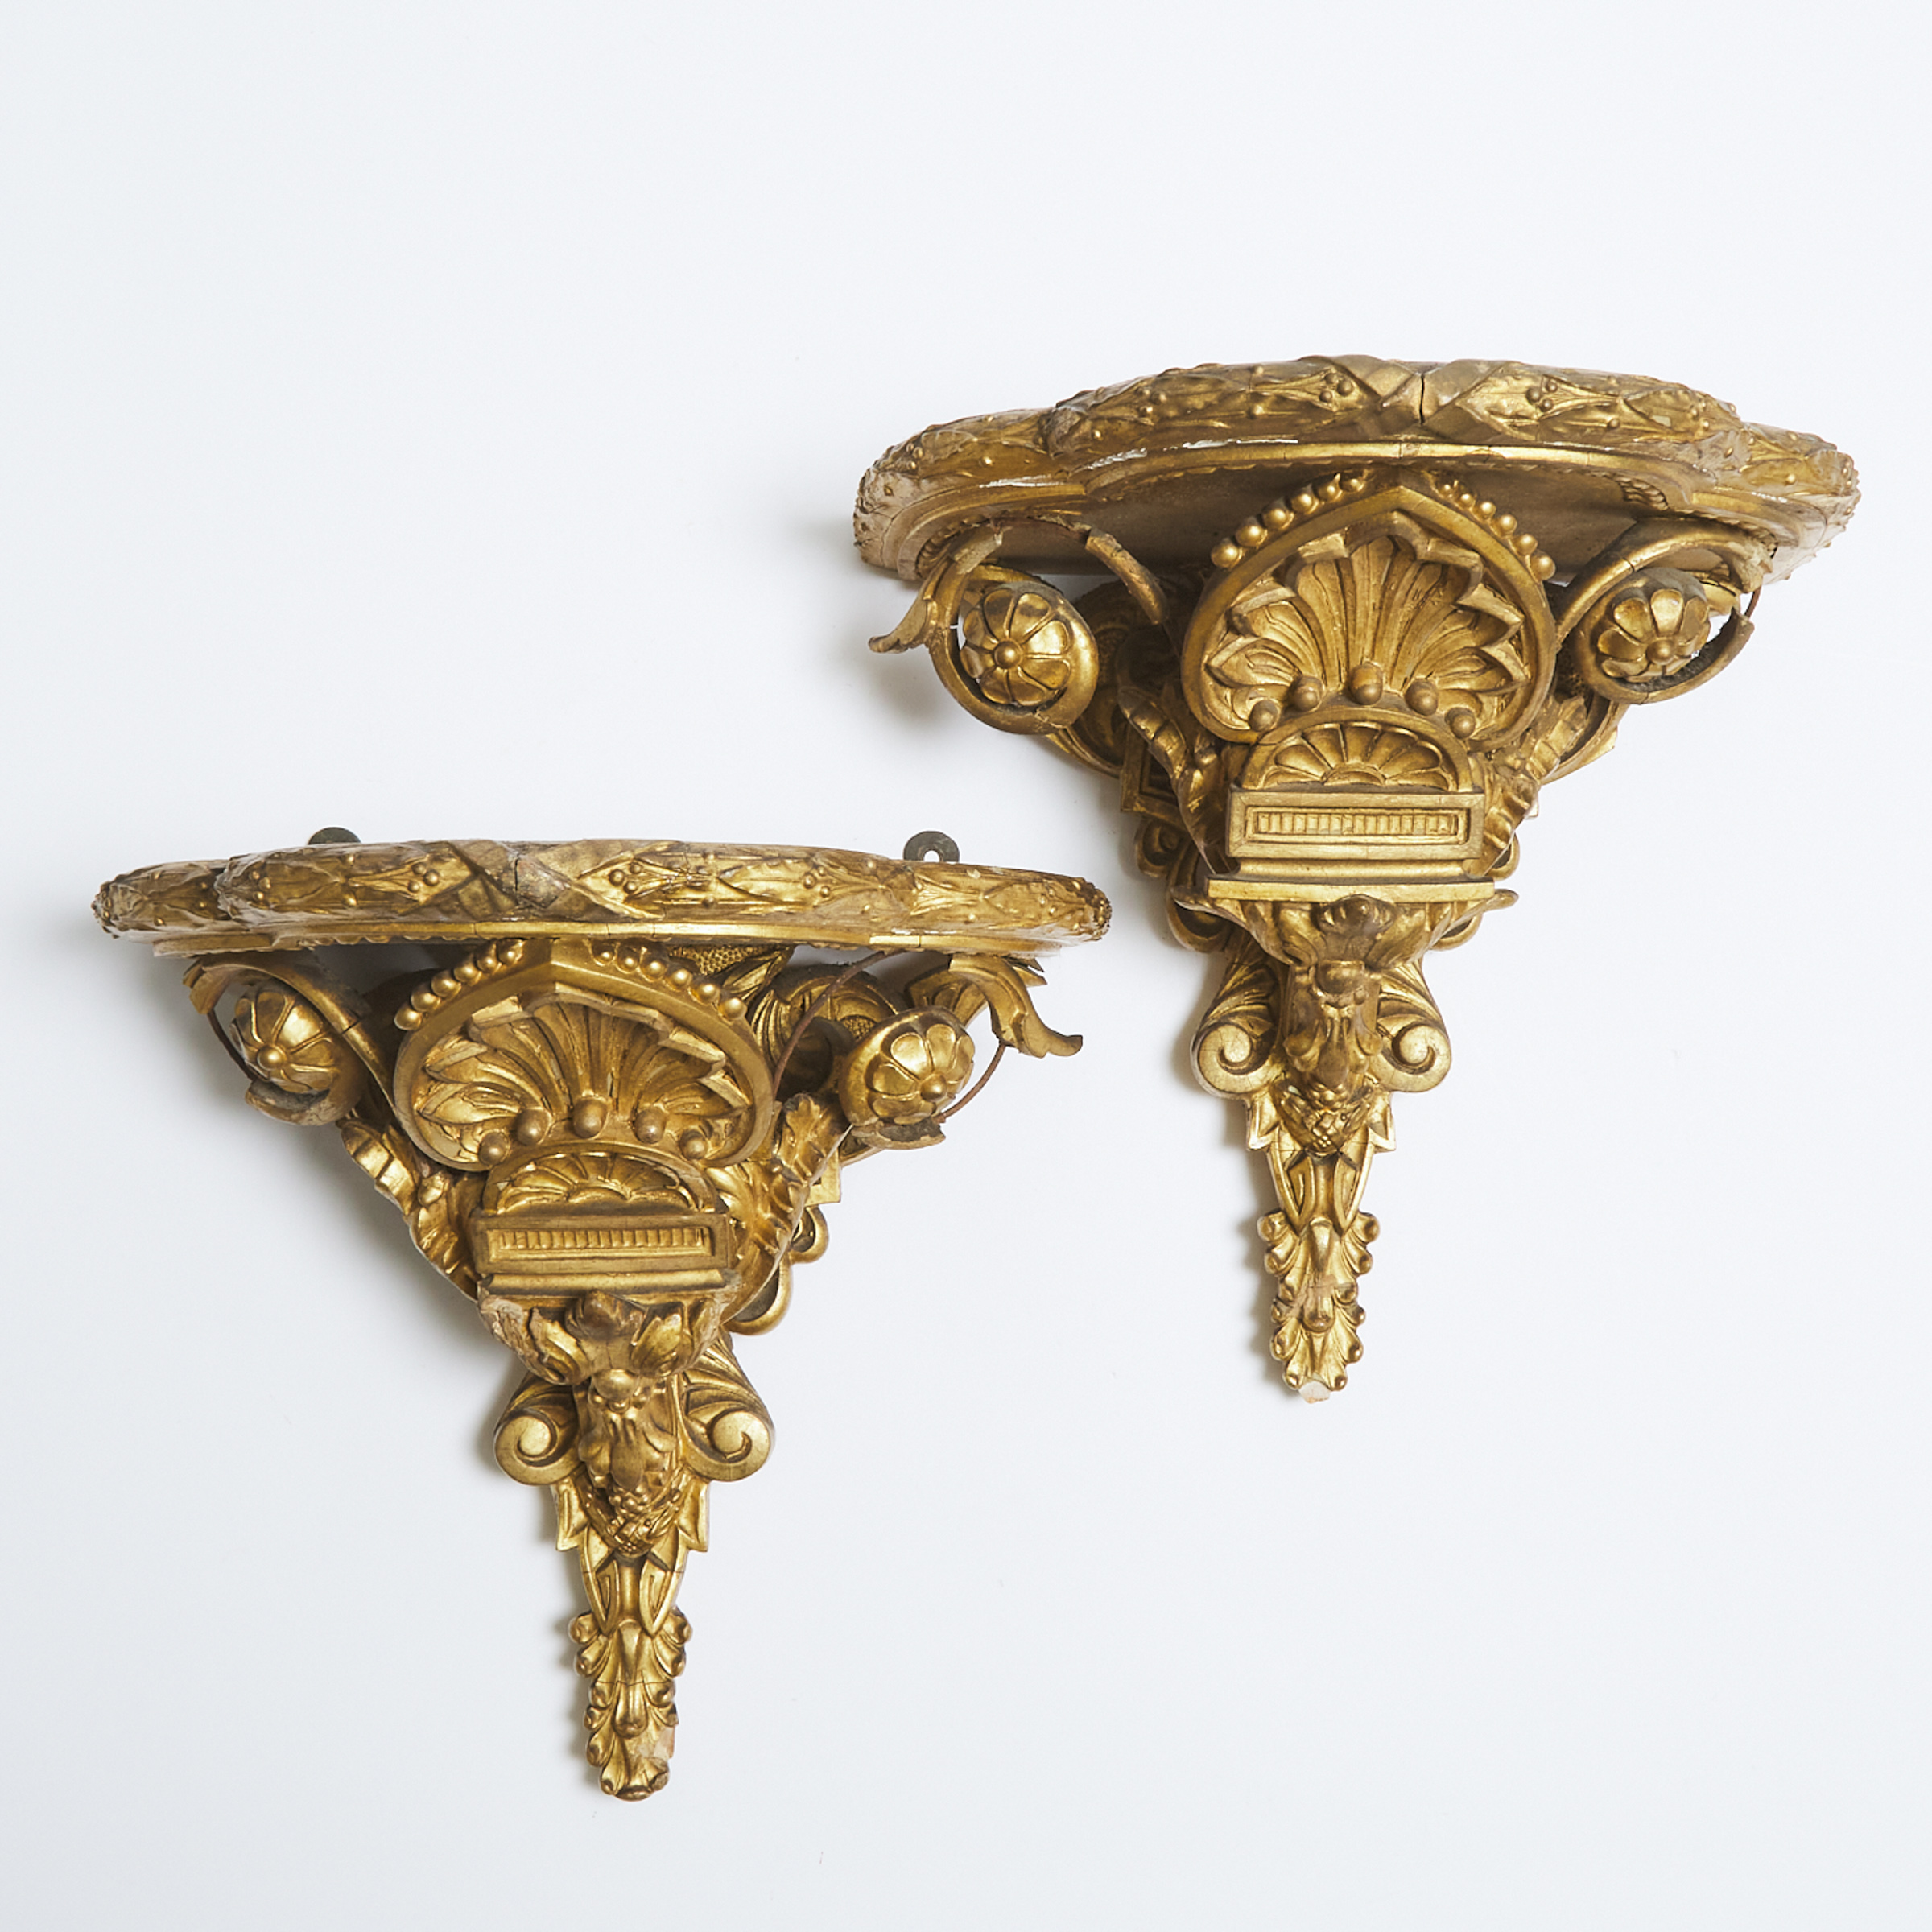 Pair of Florentine Aesthetic Movement Gilt Gesso and Wood Wall Brackets, c.1870